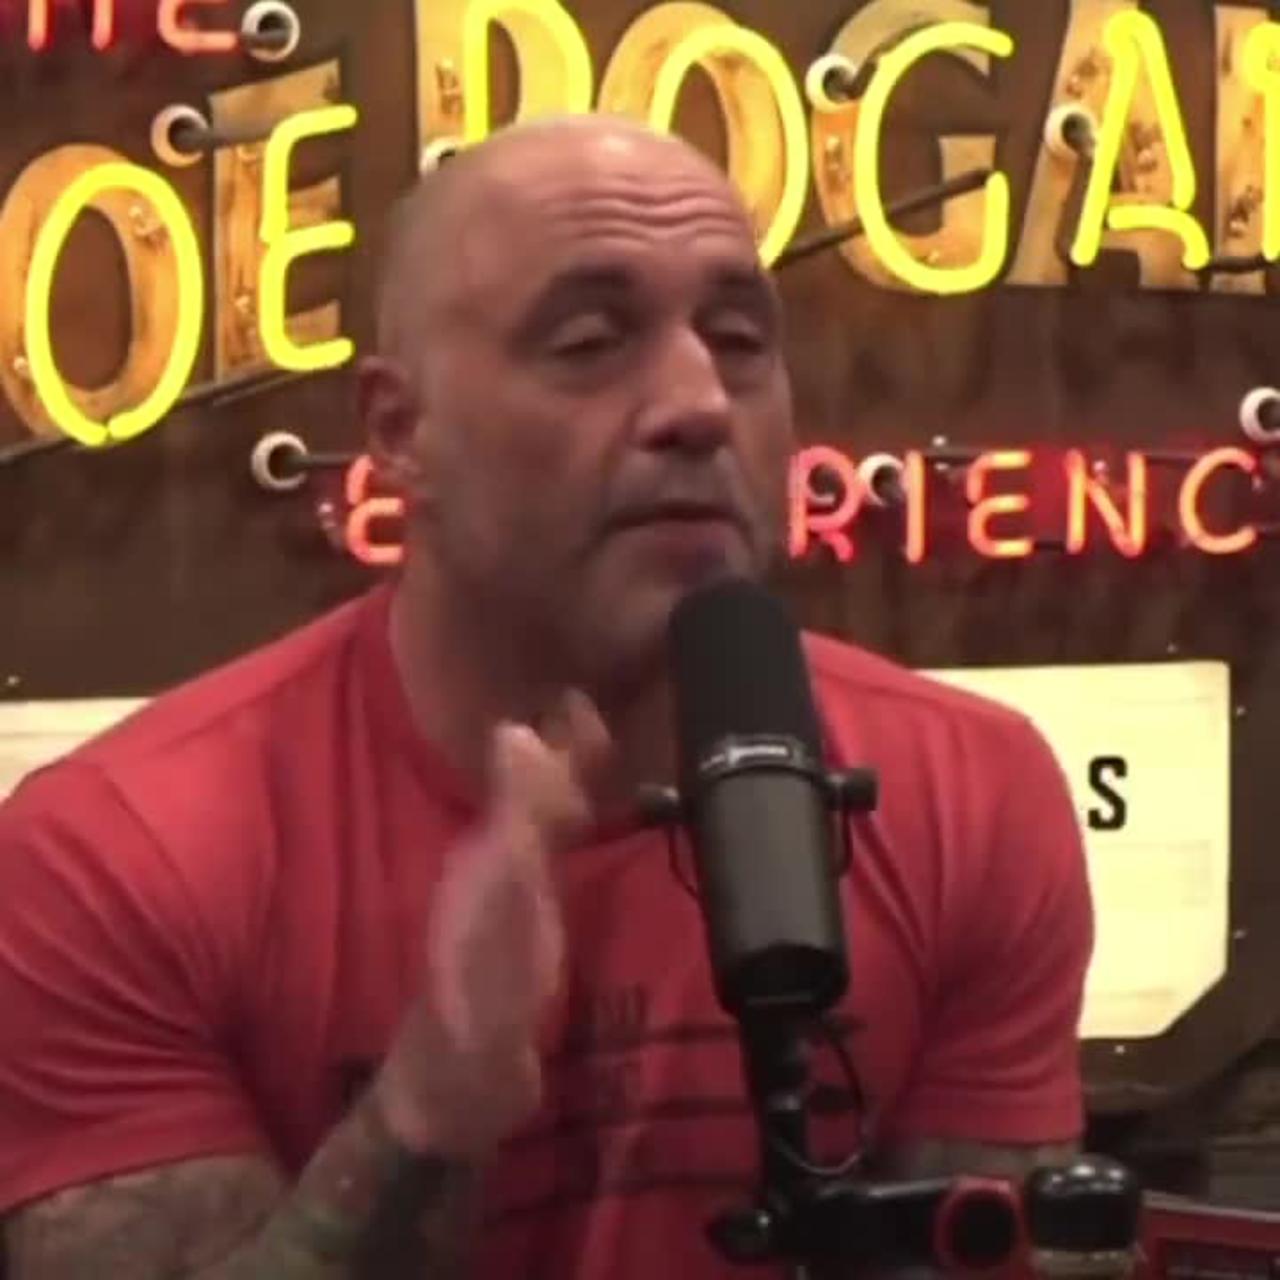 Joe Rogan has some words about the Brittney Griner situation